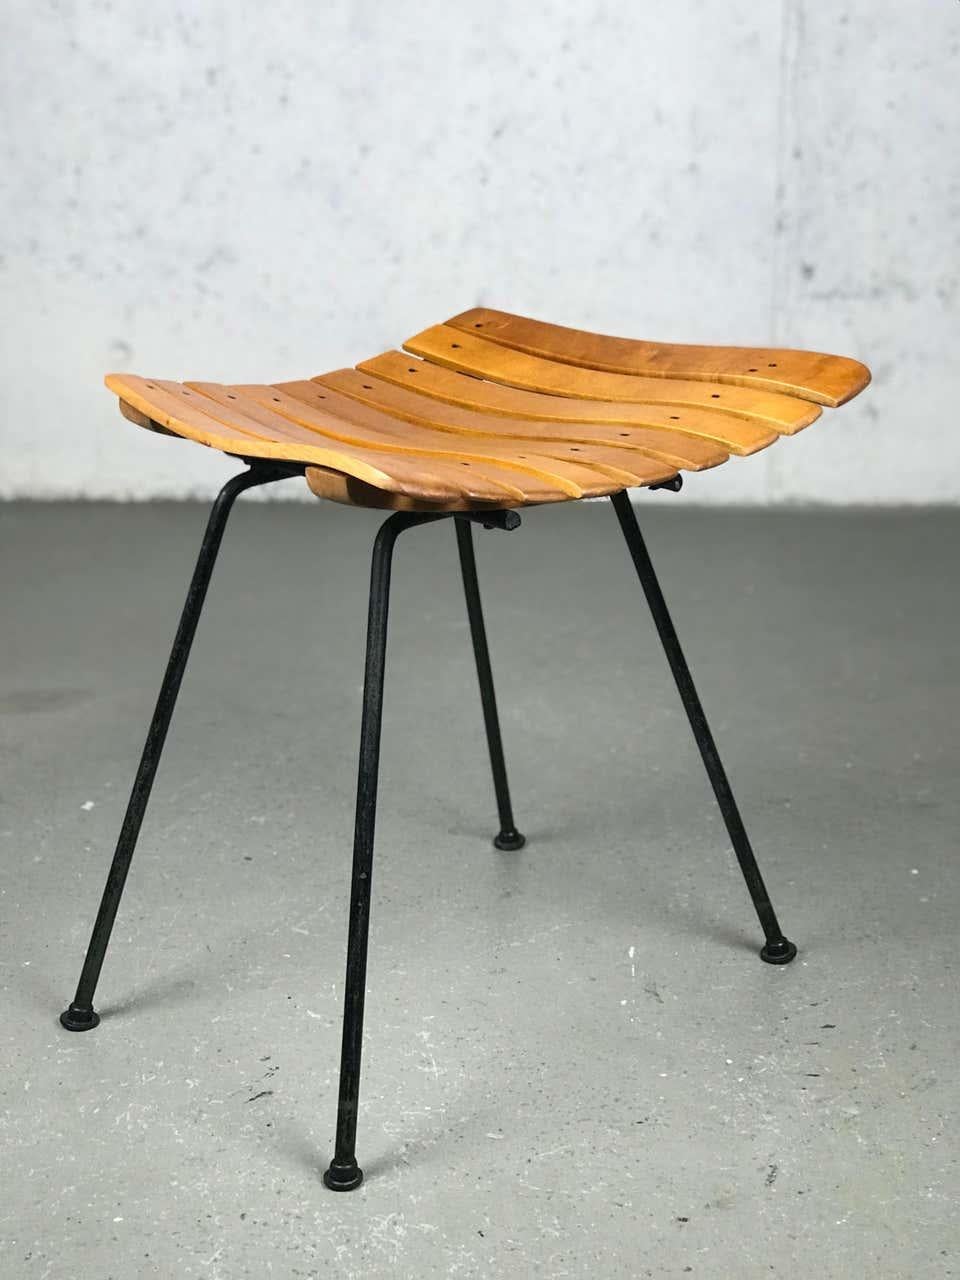 Lovely piece of American Modern: scarce Minimalist vanity stool by Arthur Umanoff for Shaver-Howard, 1950s. Restored wood slats. The iron was not repainted and shows age appropriate wear. Excellent curvature of the wood slats. (3) available.